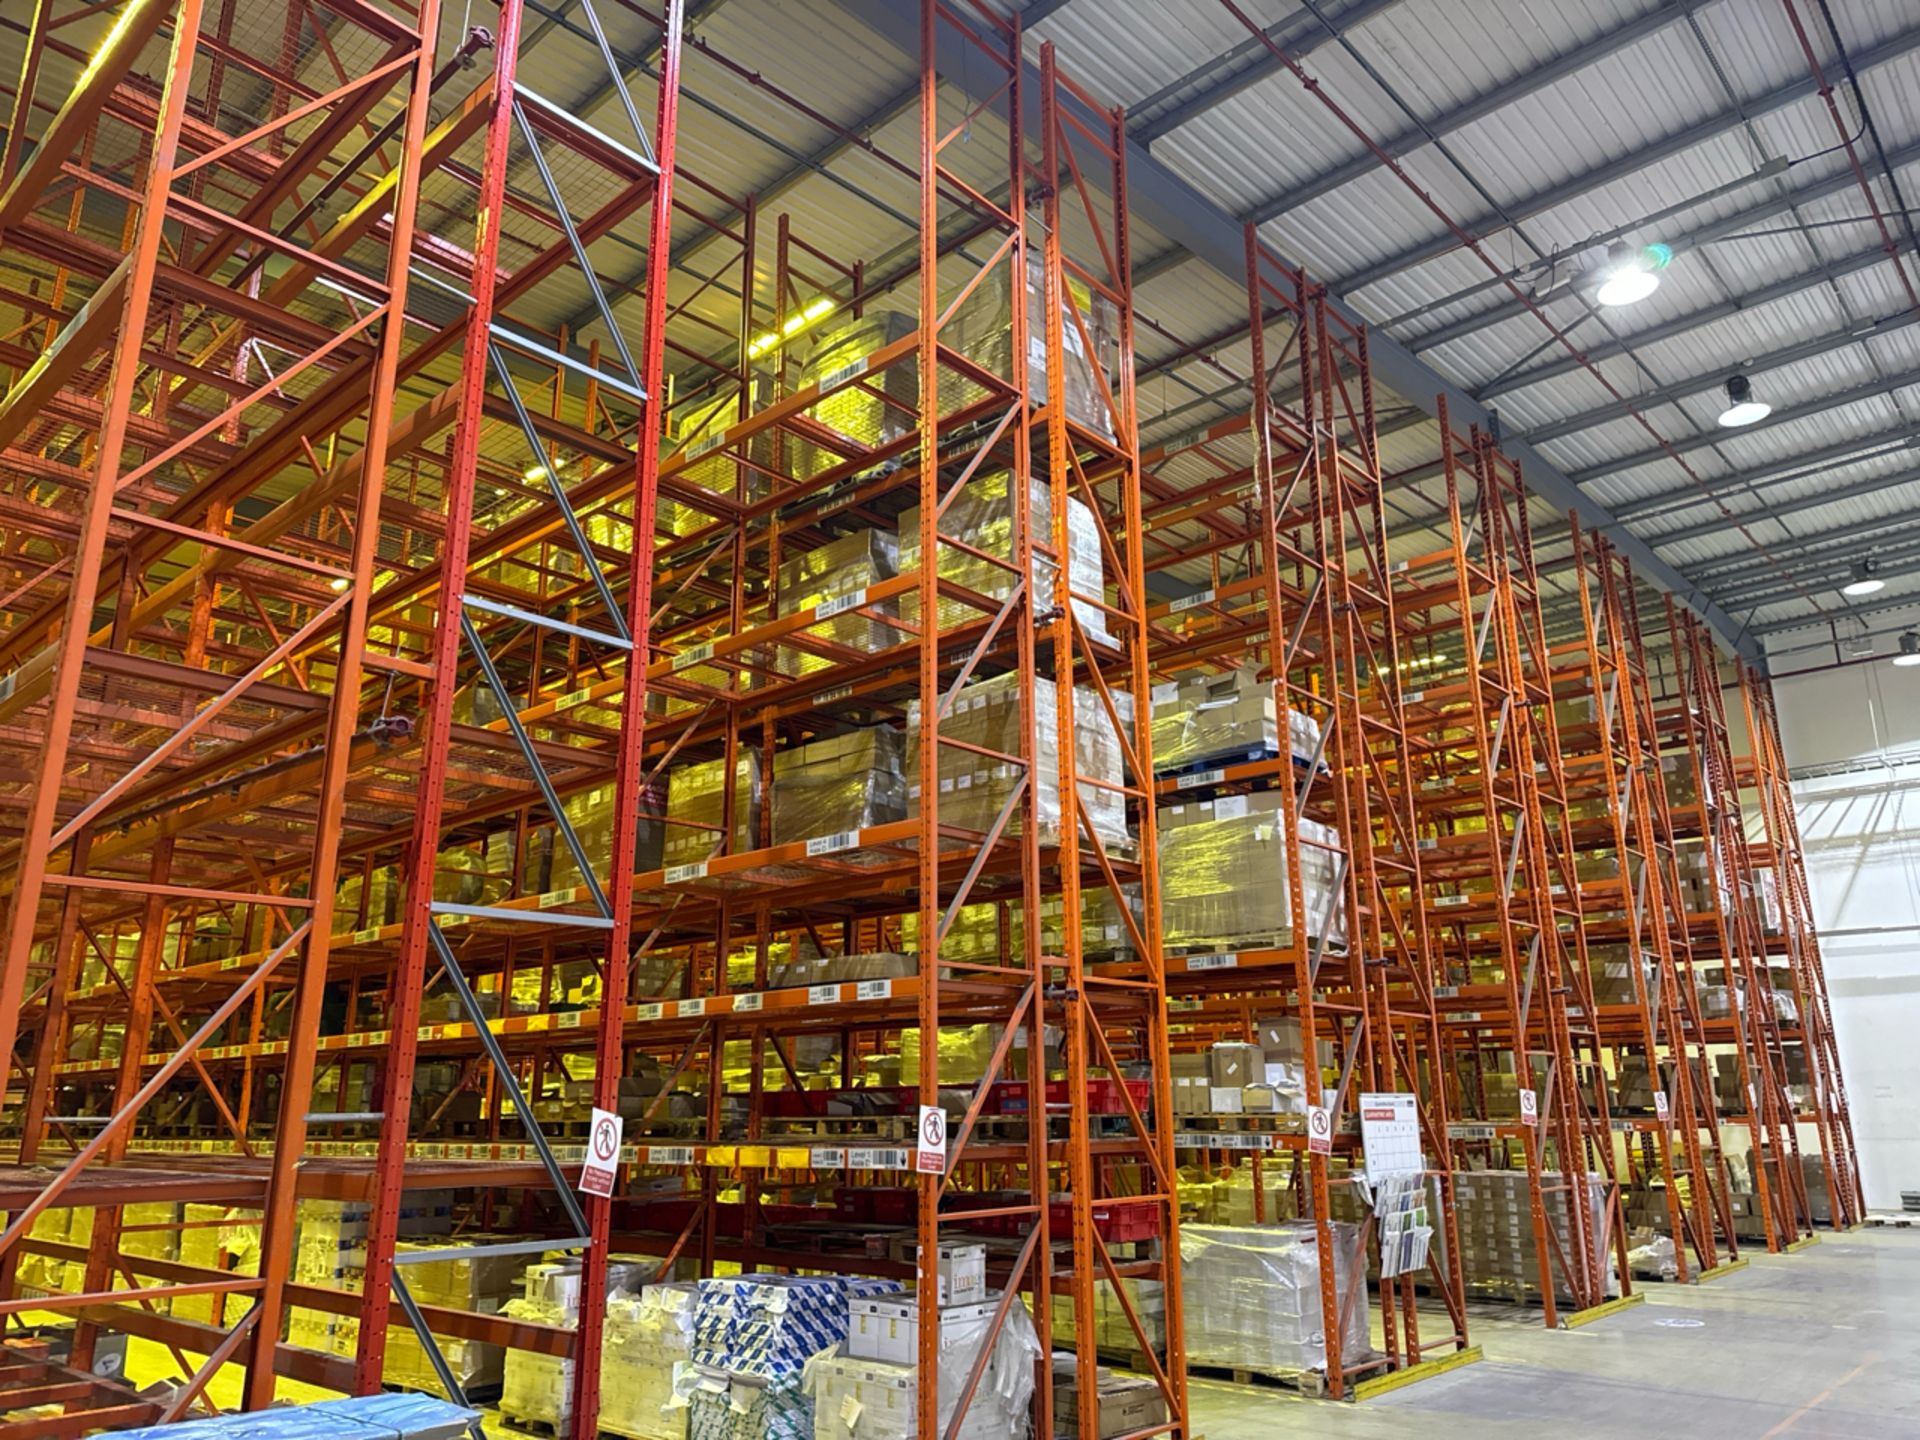 22 Bays Of Boltless Pallet Racking - Image 11 of 11